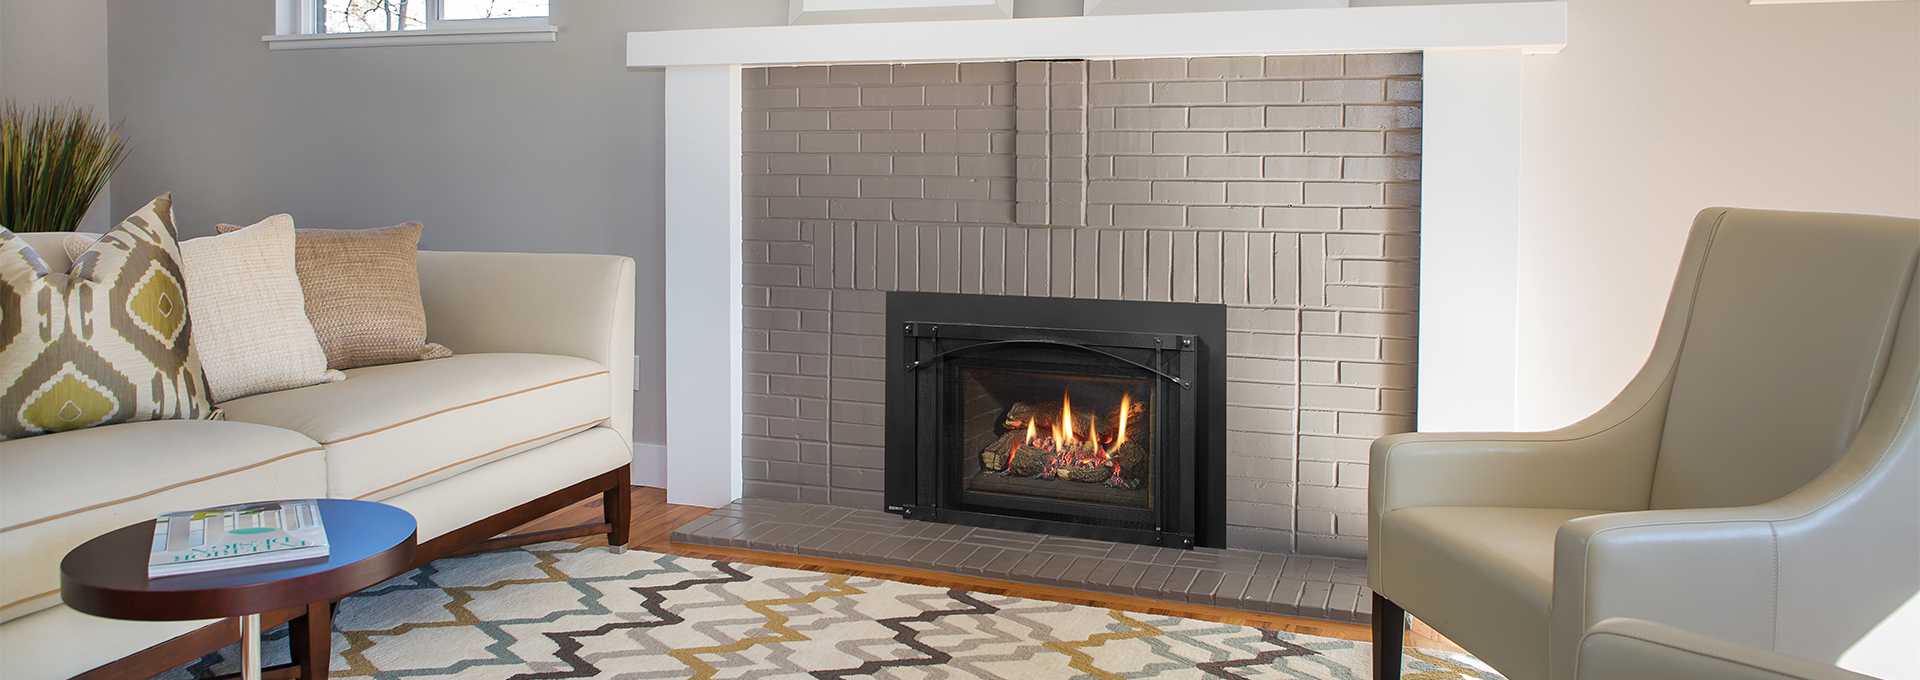 Top 5 Reasons Why You Should Upgrade to a New Gas Fireplace Insert 